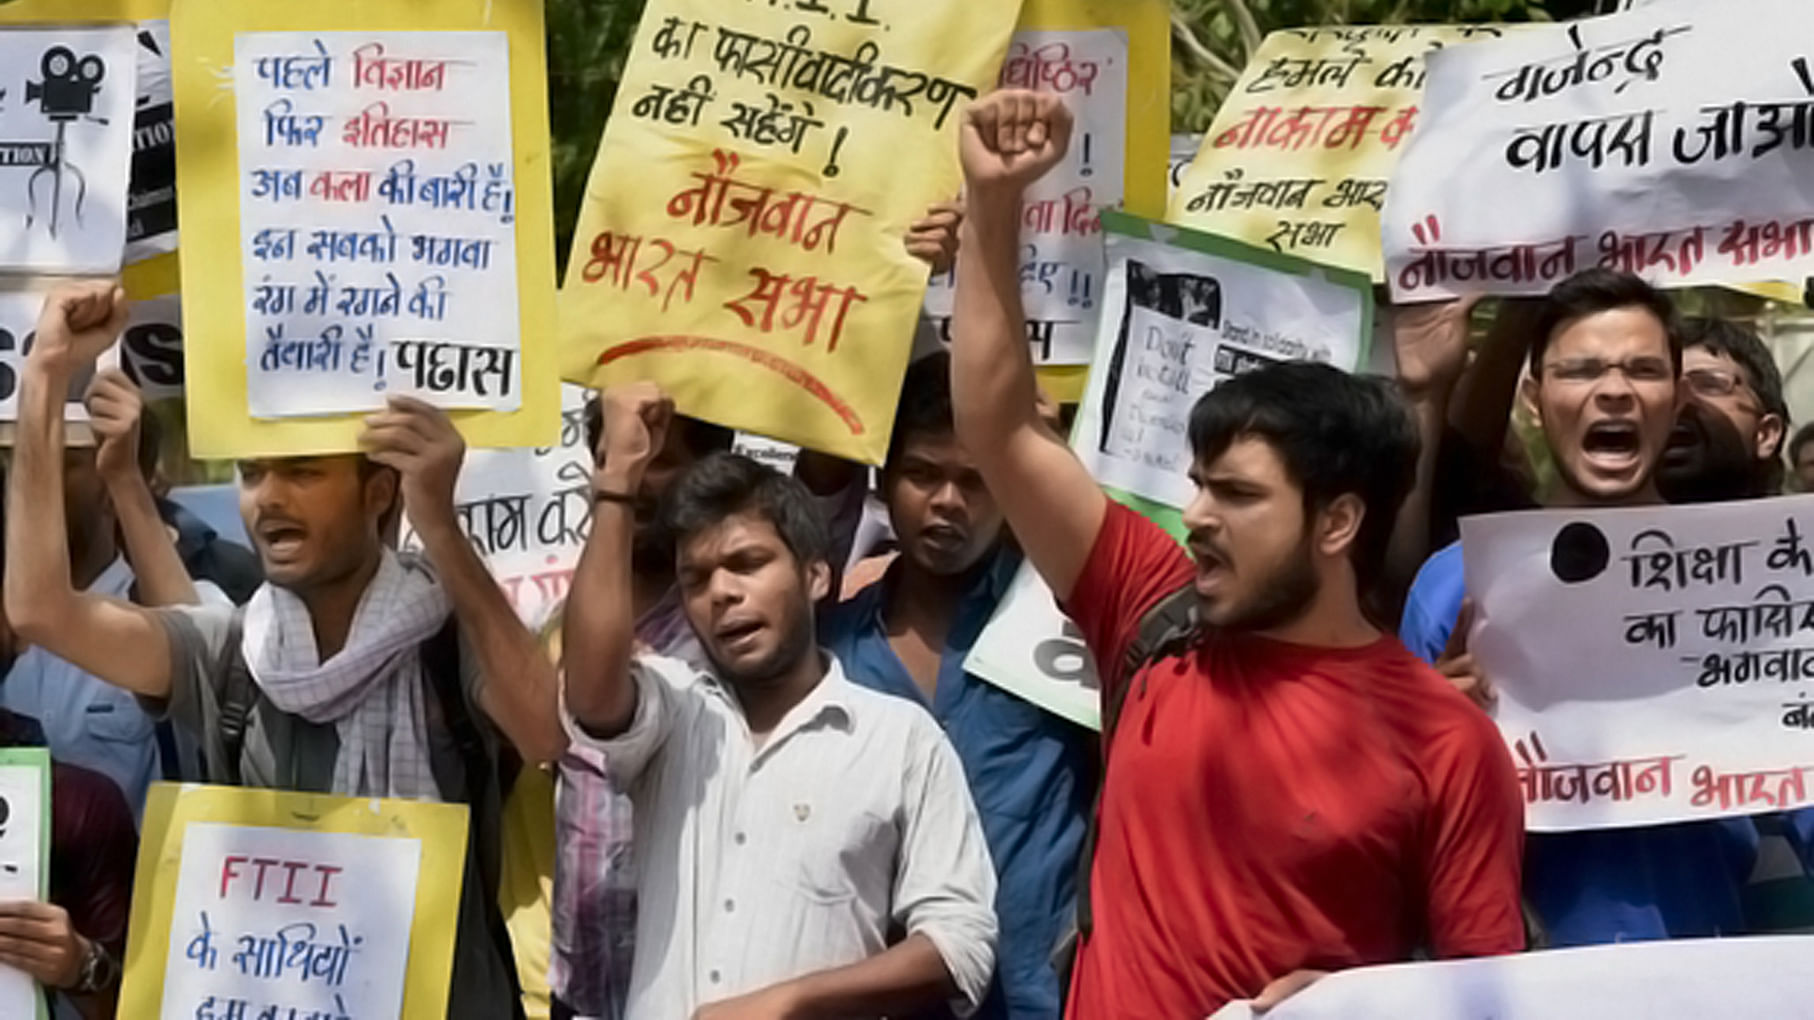 Students shout slogans at a protest against the appointment of Gajendra Chauhan. (Photo: PTI)